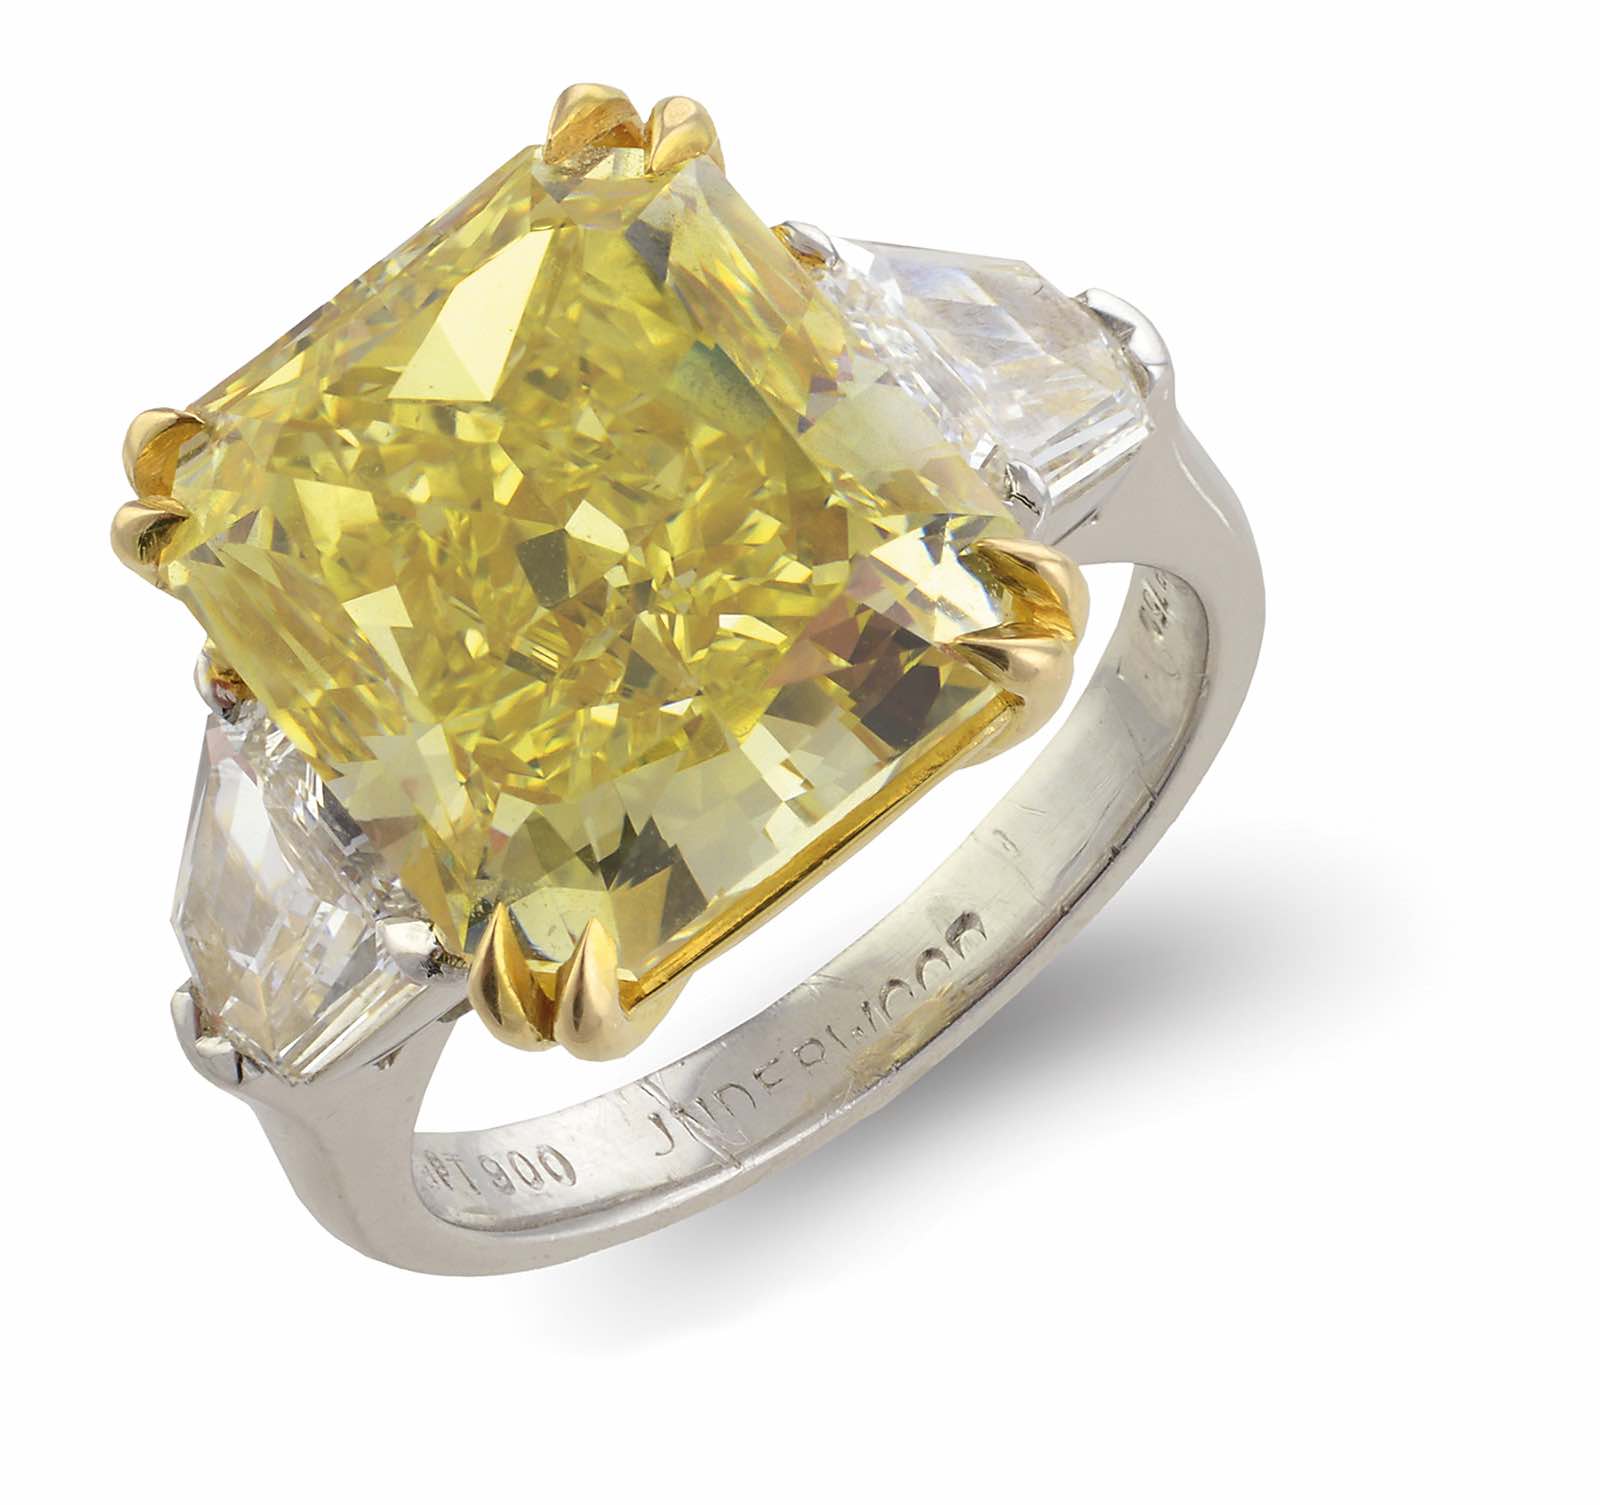 Lot #1499, a 10.02ct Yellow Diamond Ring estimated at $150,000-200,000.